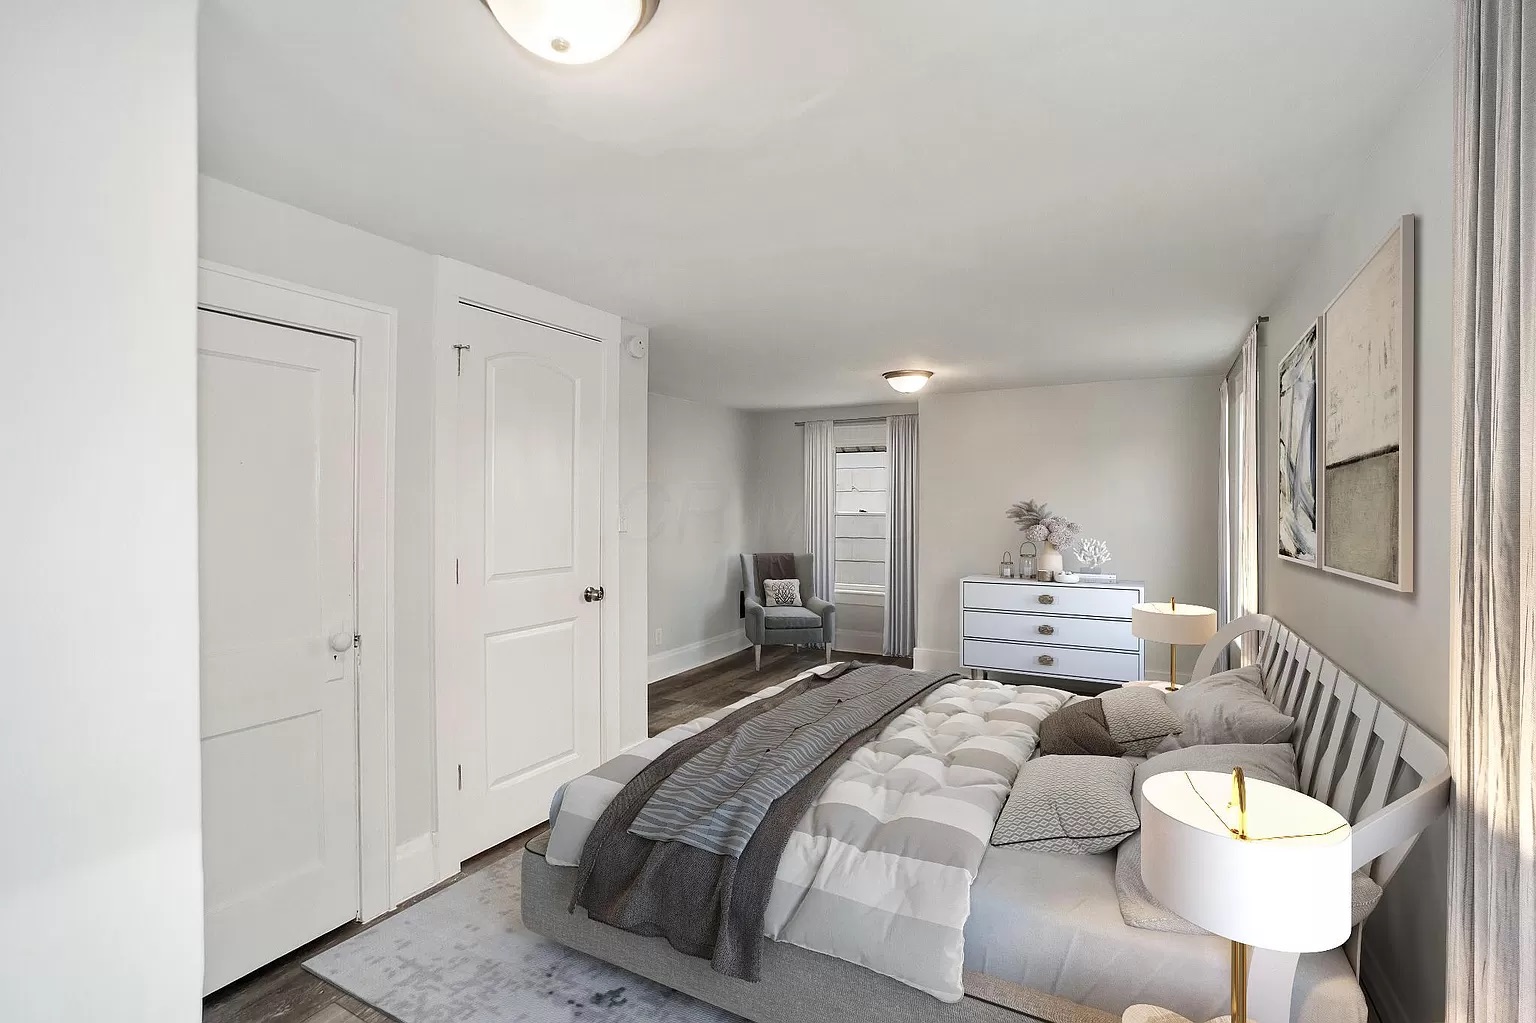 Fake bed, fake dresser.   But good fakes, right?   You'd never know on first glance.  That's the point.   This is virtual staging.   Eliminate the cost of an interior designer and go for the low cost of real estate photography by Mark Yannitell!  740-212-2900